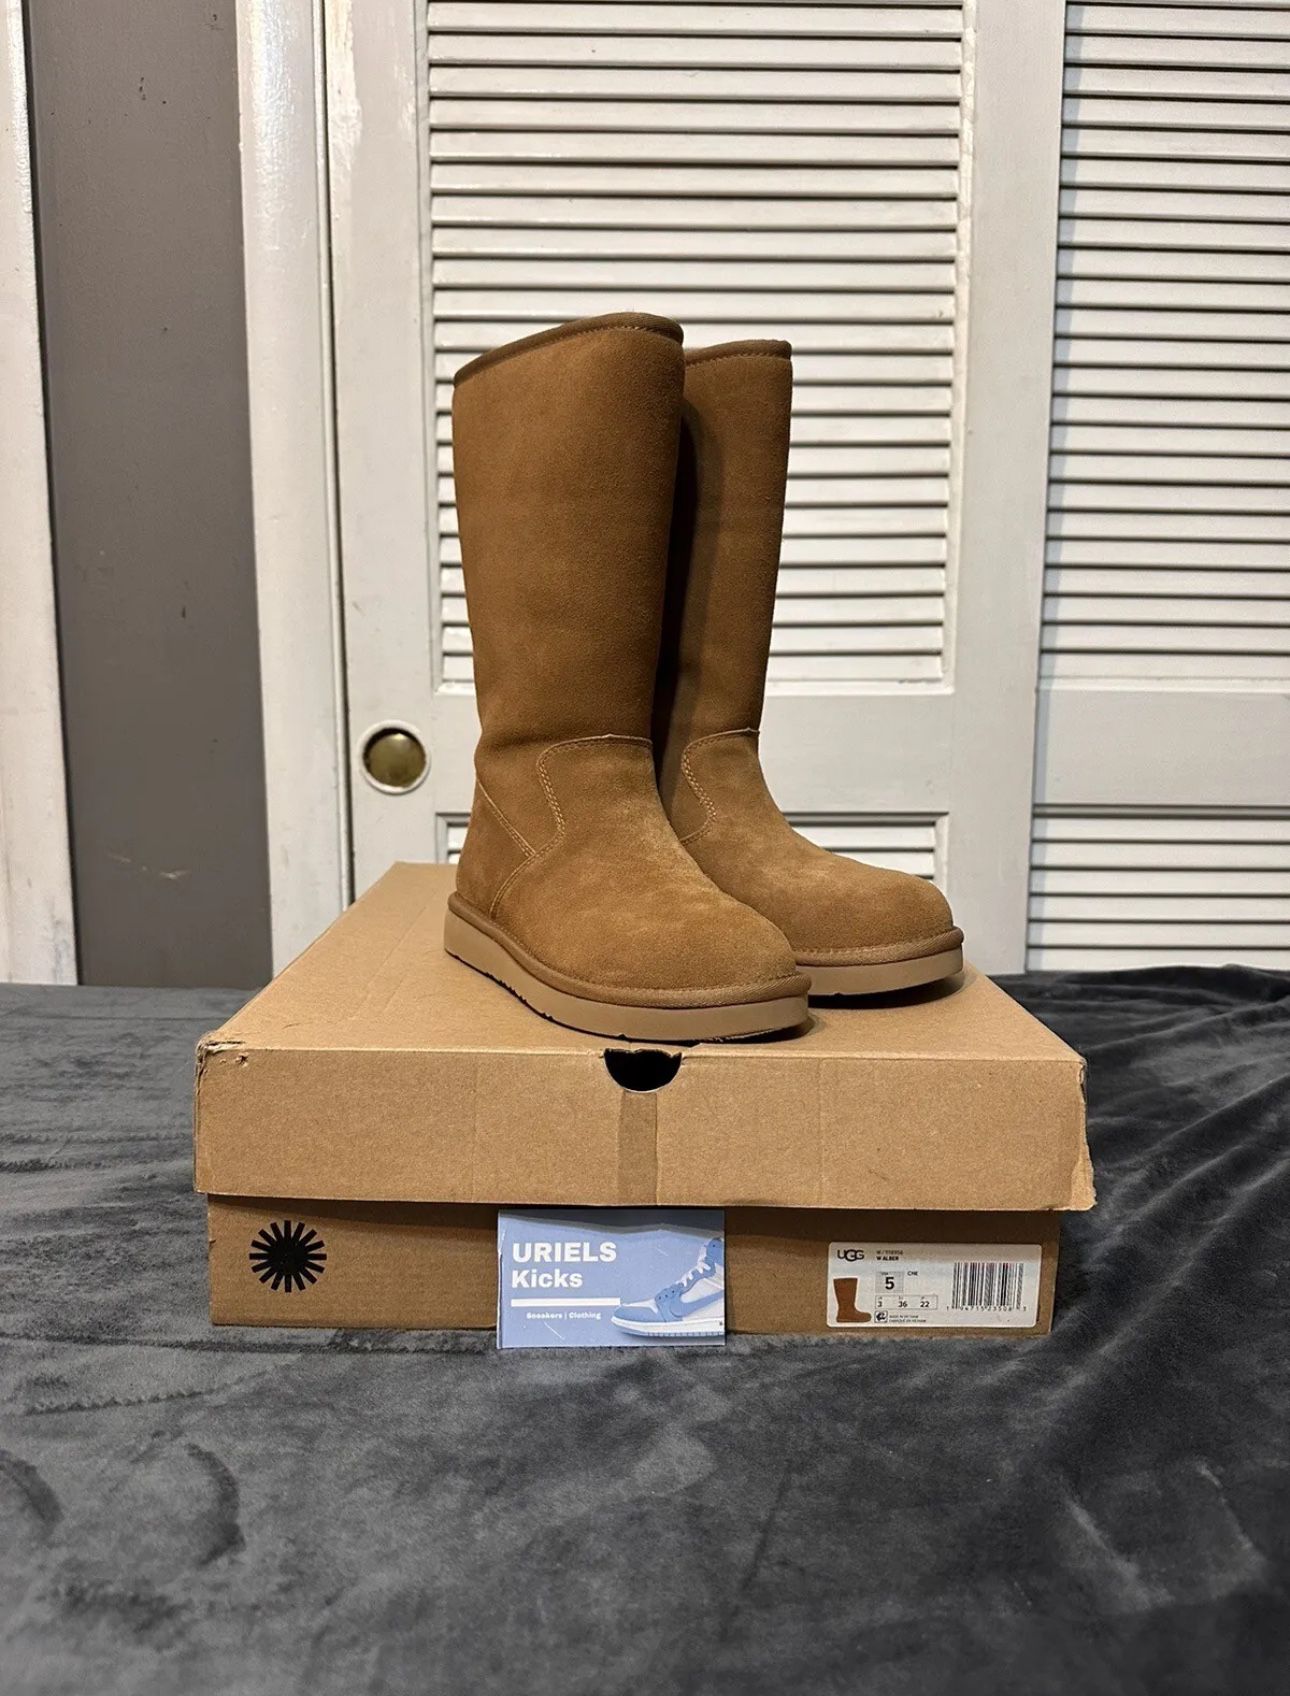 US Size 5 - UGG Women's Alber Chestnut Classic Suede Boot Water Resistant